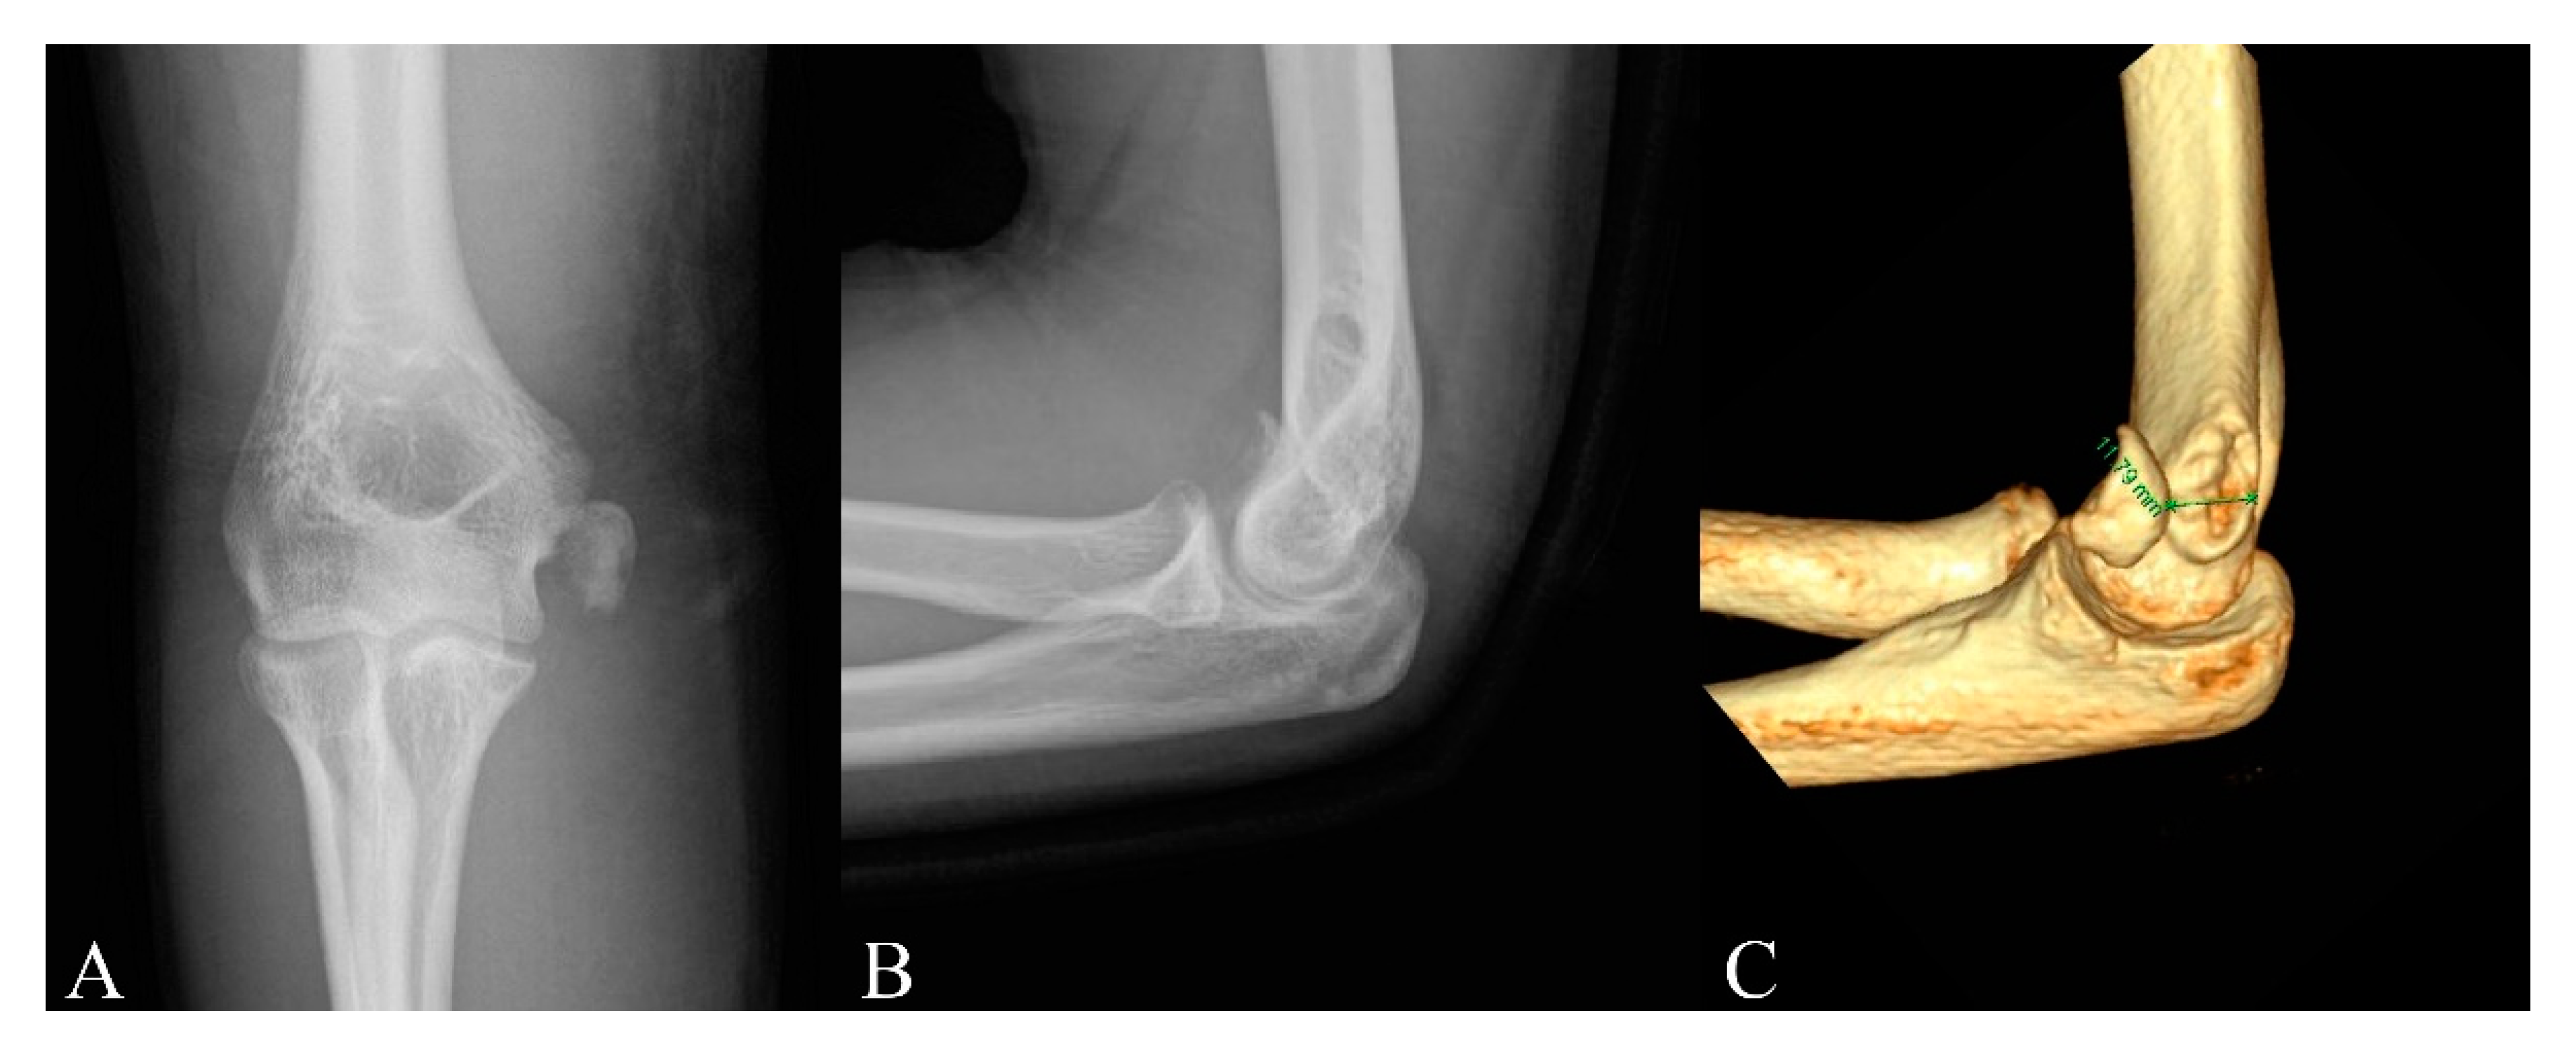 Diagnostics Free Full Text Is Computed Tomography Necessary For Diagnostic Workup In Displaced Pediatric Medial Epicondyle Fractures Html